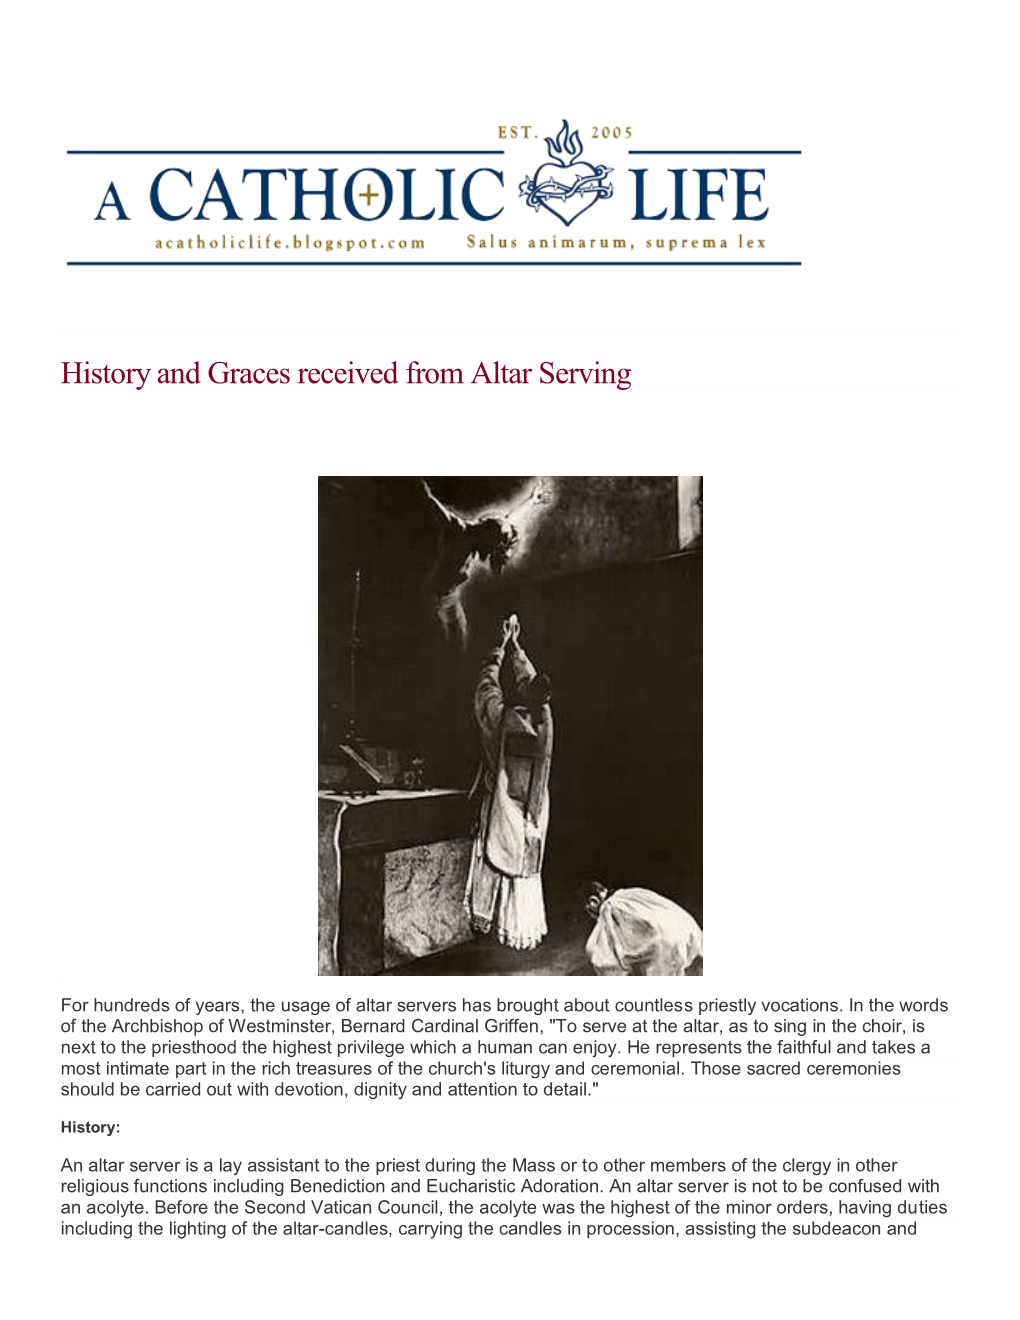 History and Graces Received from Altar Serving